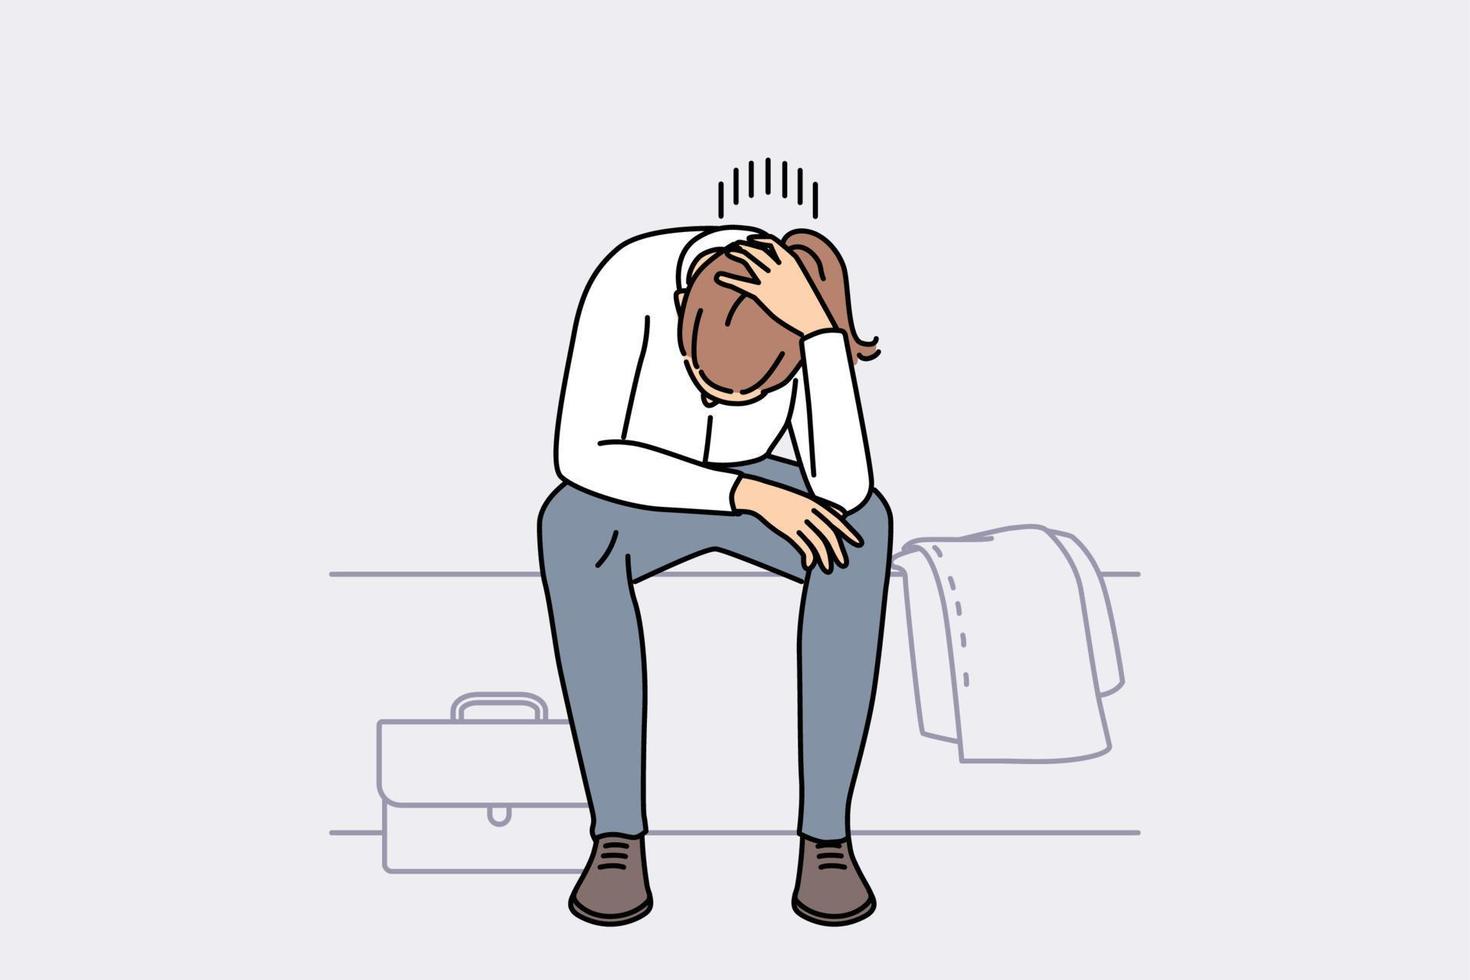 Distressed young woman feel low and depressed at work. Unhappy female employee suffer from burnout or depression at workplace. Vector illustration.